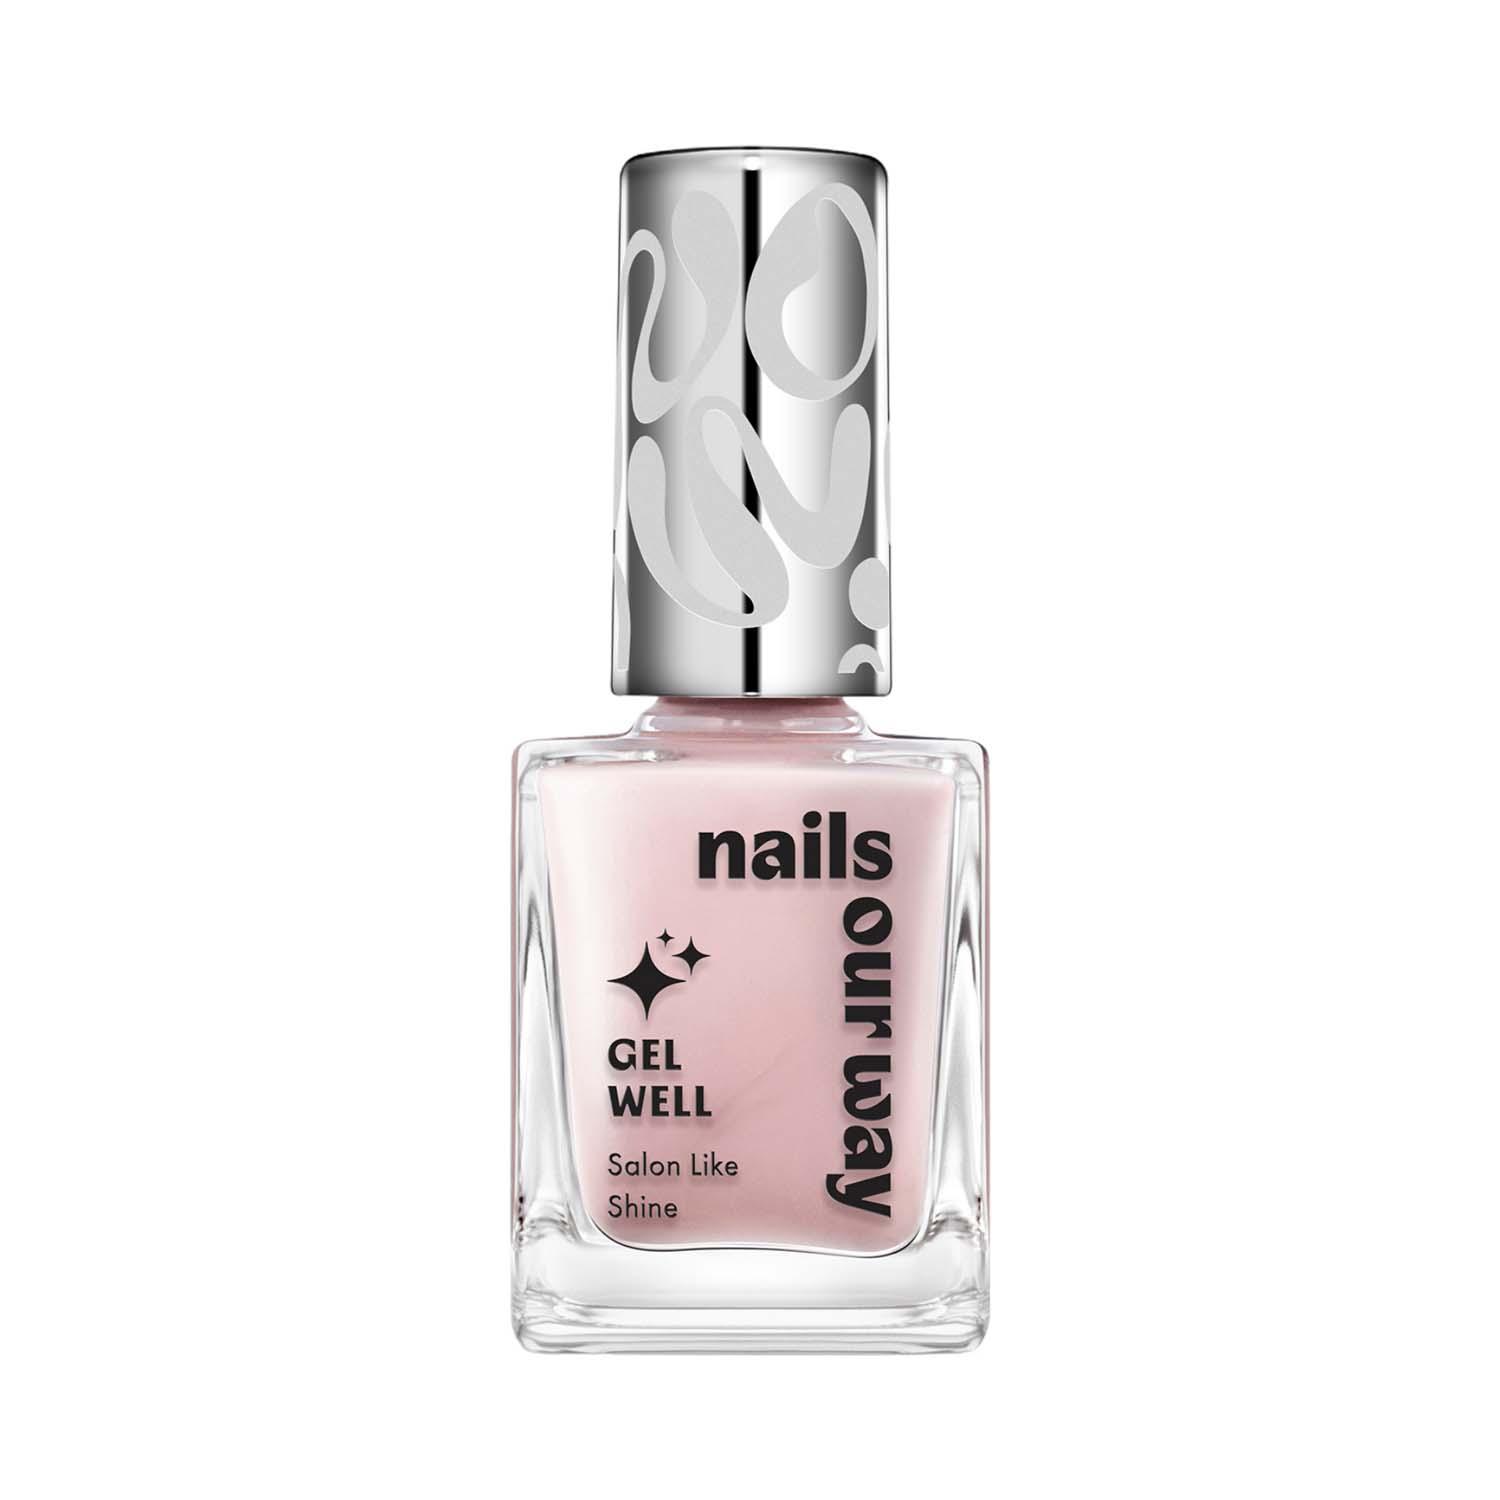 Nails Our Way Gel Well Nail Enamel - 201 Charismatic (10 ml)